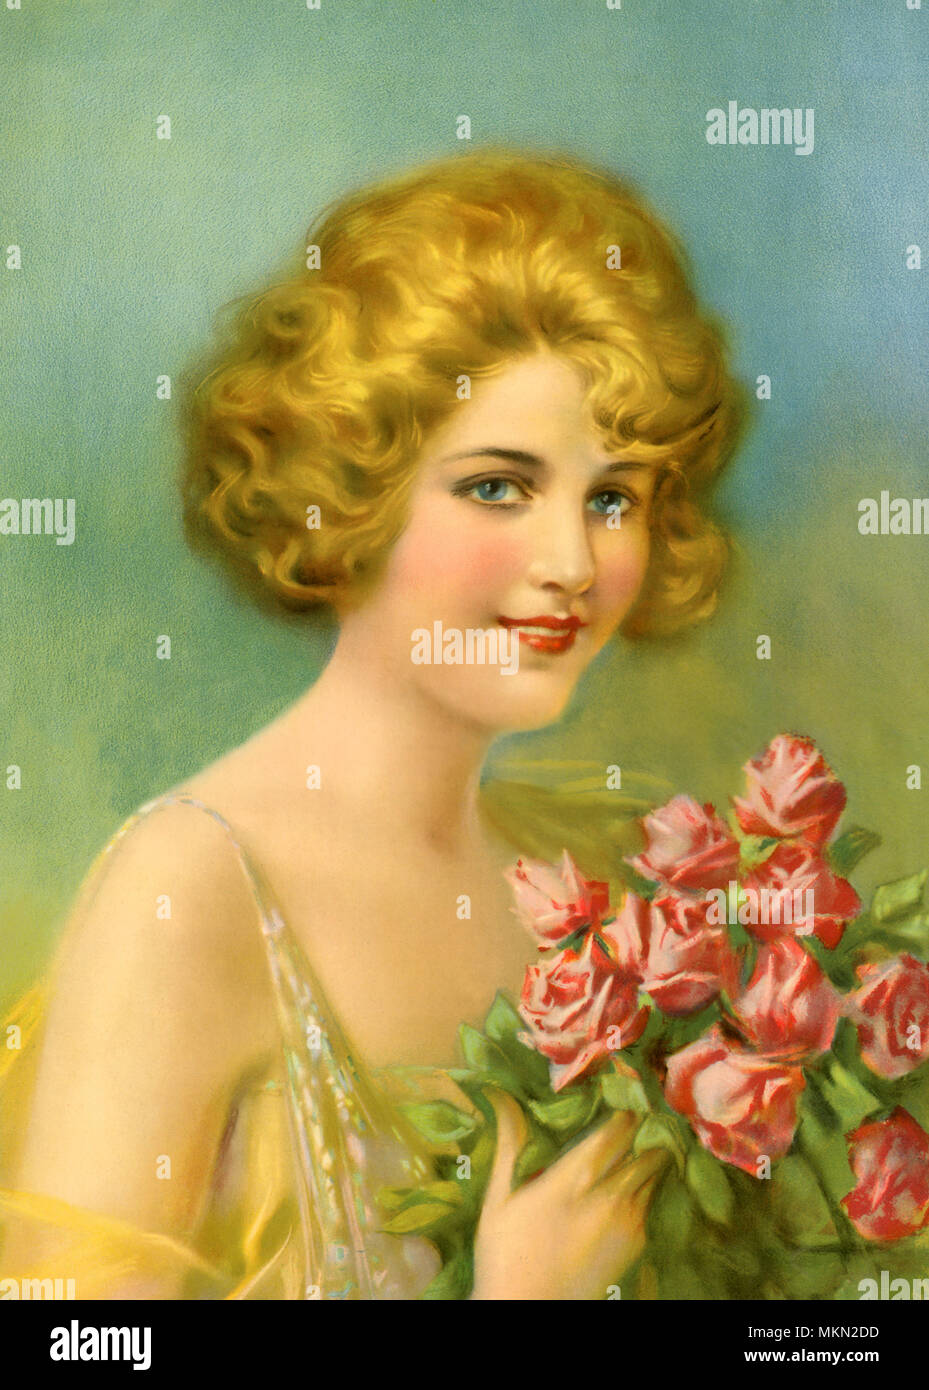 Lady with Roses Stock Photo